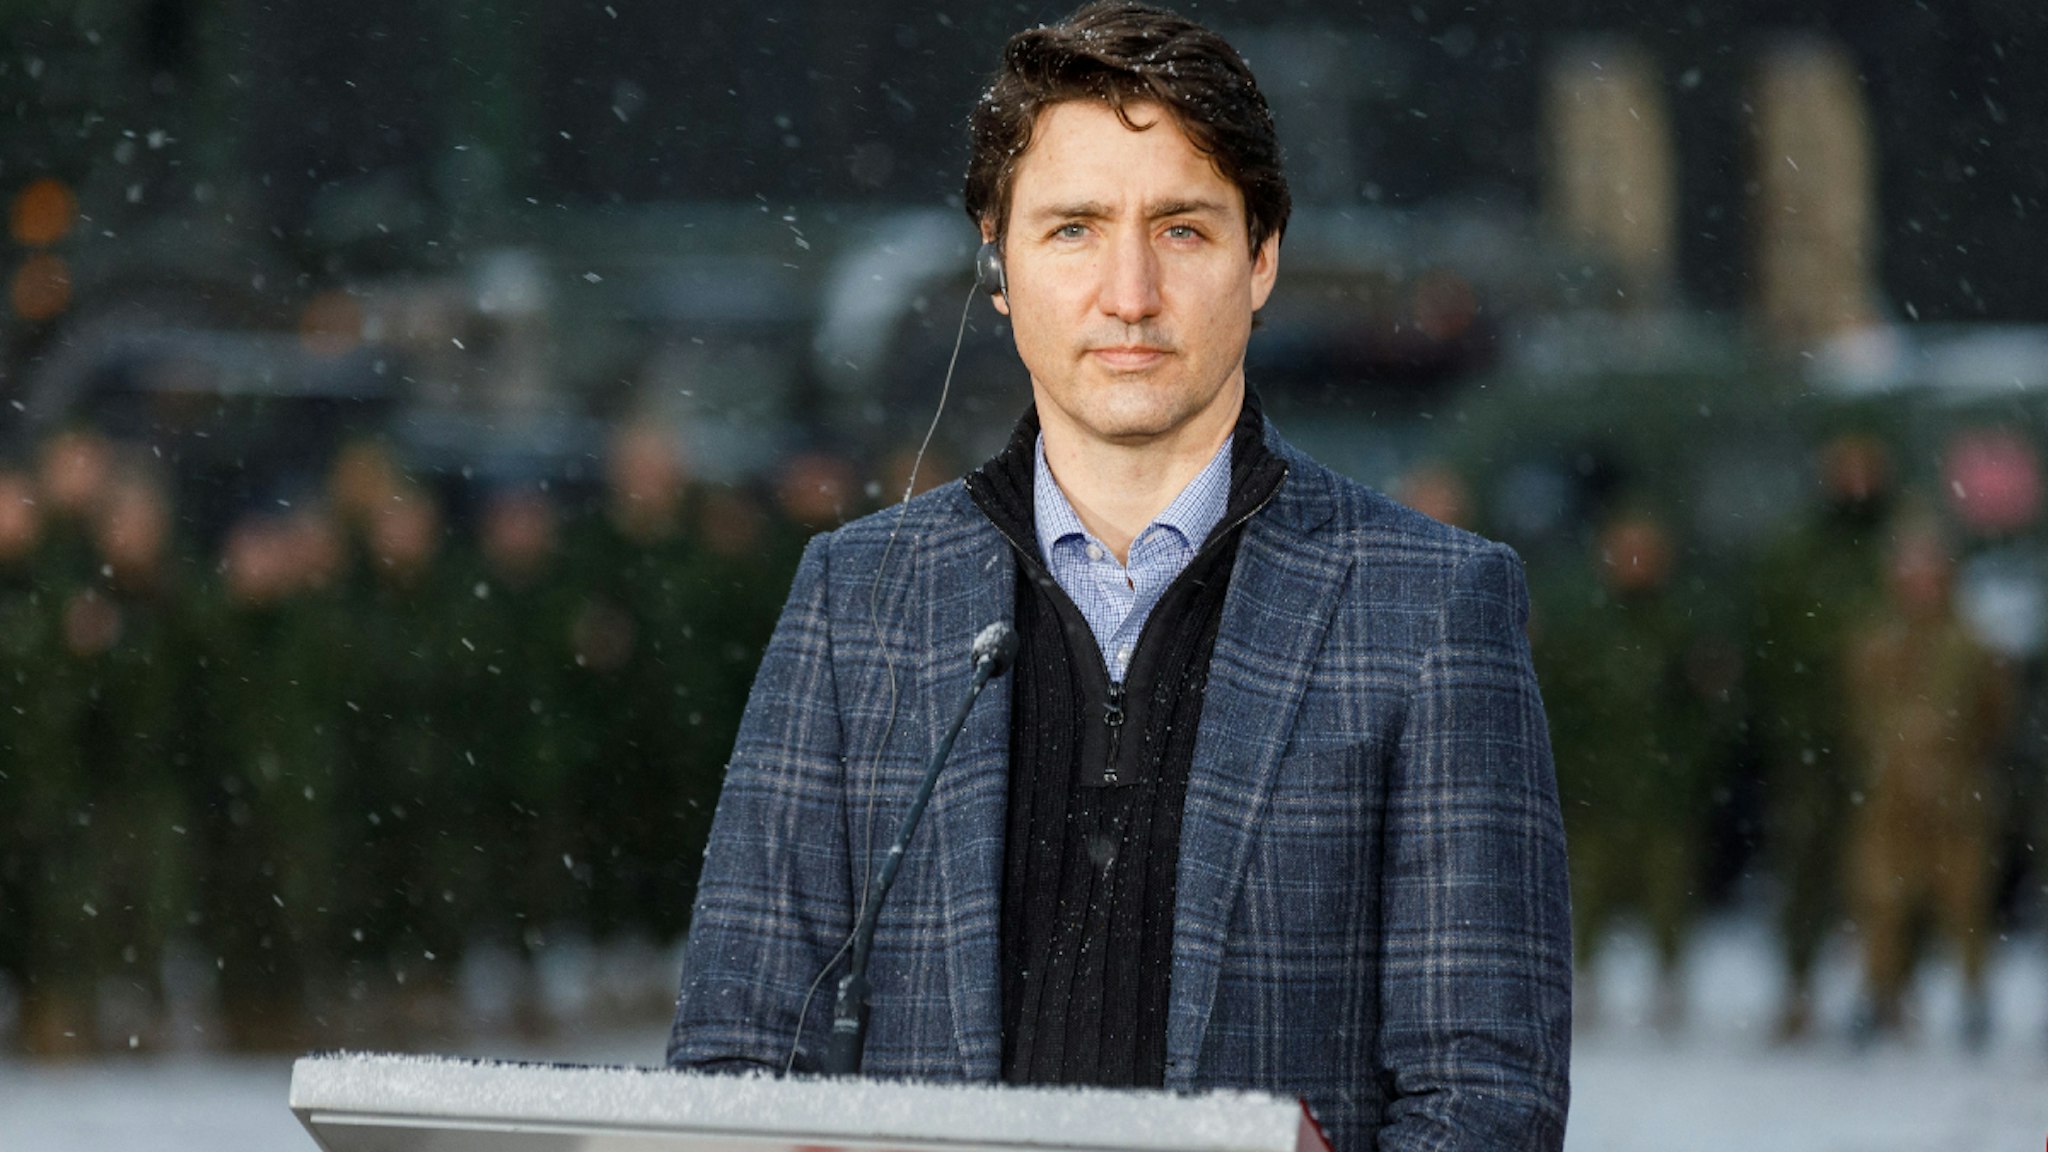 Canada's Prime Minister Justin Trudeau addresses a press conference at the end of a visit of the Adazi military base, north east of Riga, Latvia, on March 8, 2022.